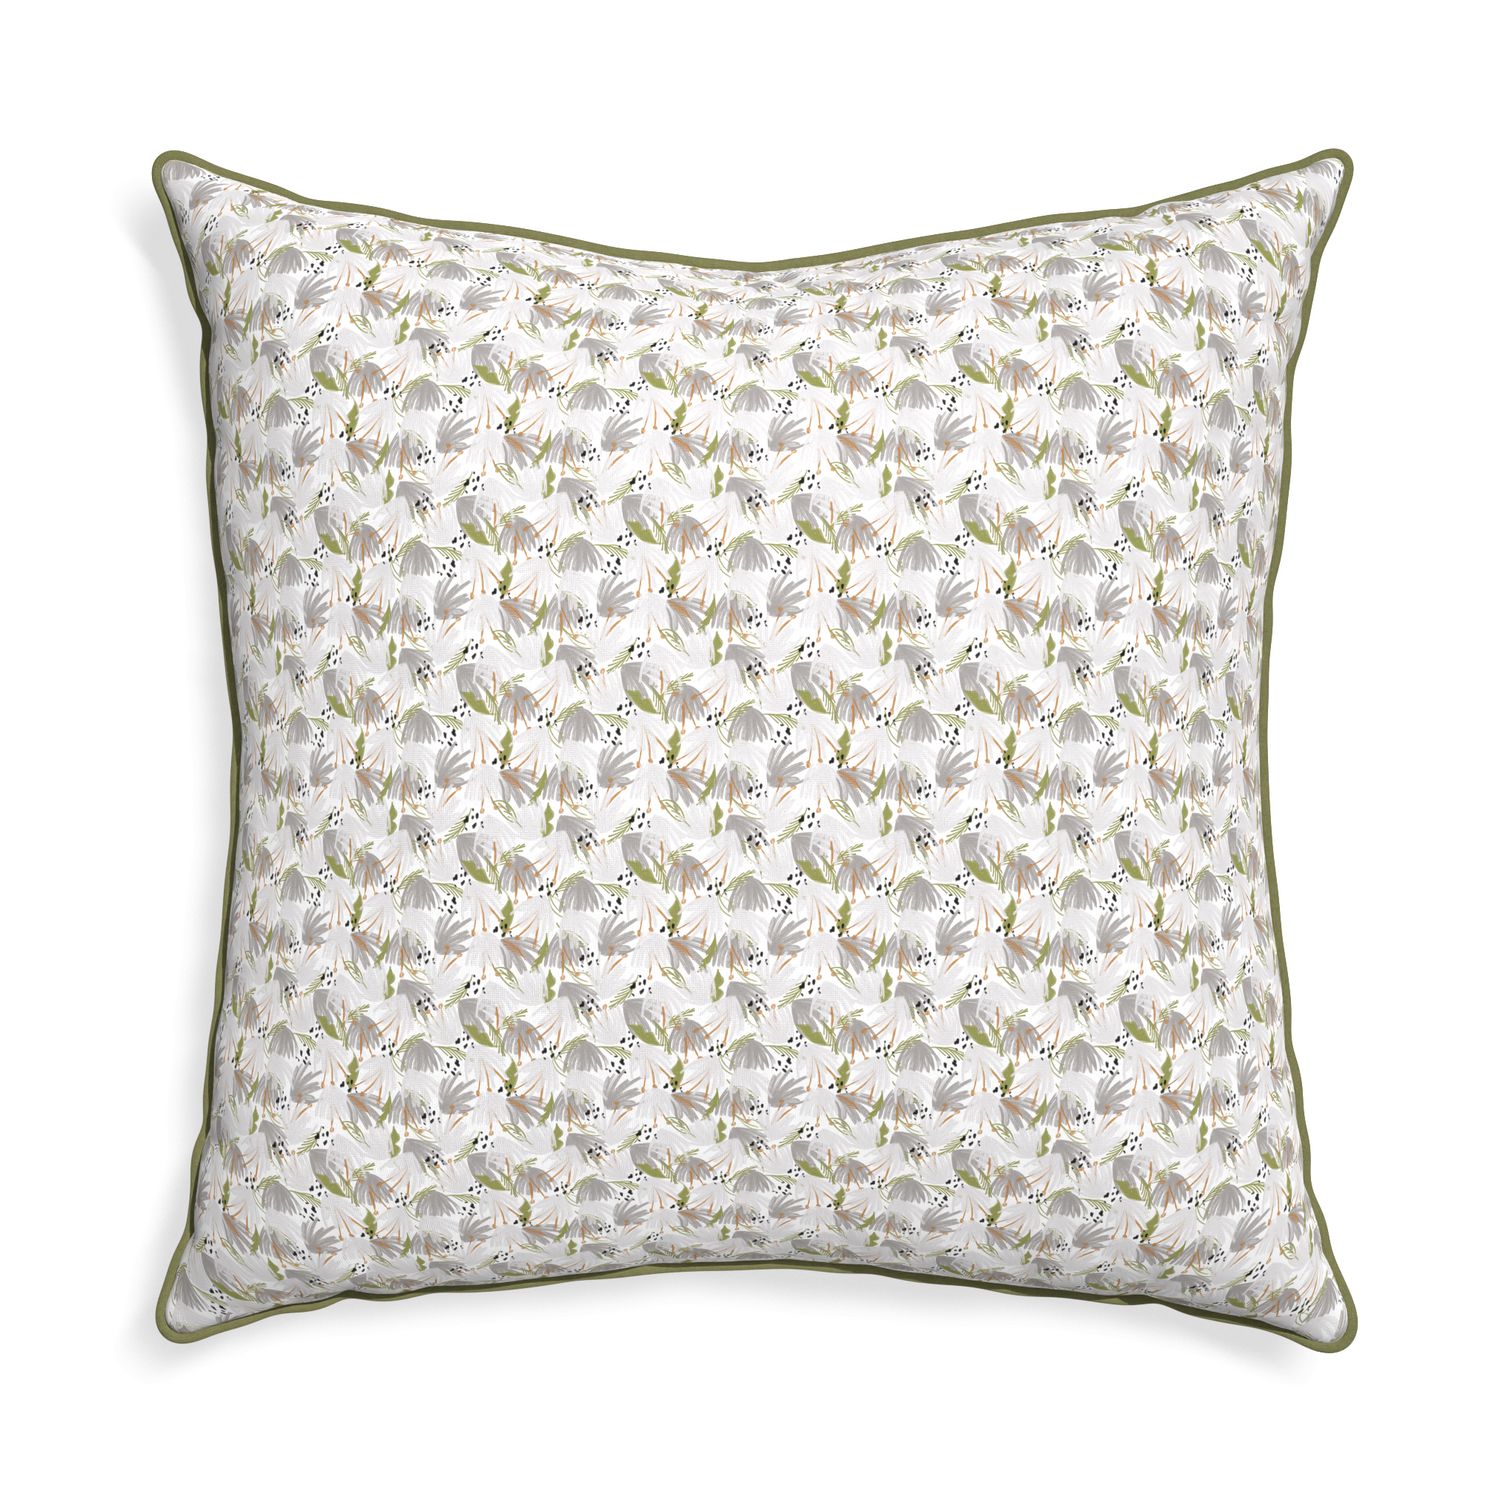 Euro-sham eden grey custom pillow with moss piping on white background